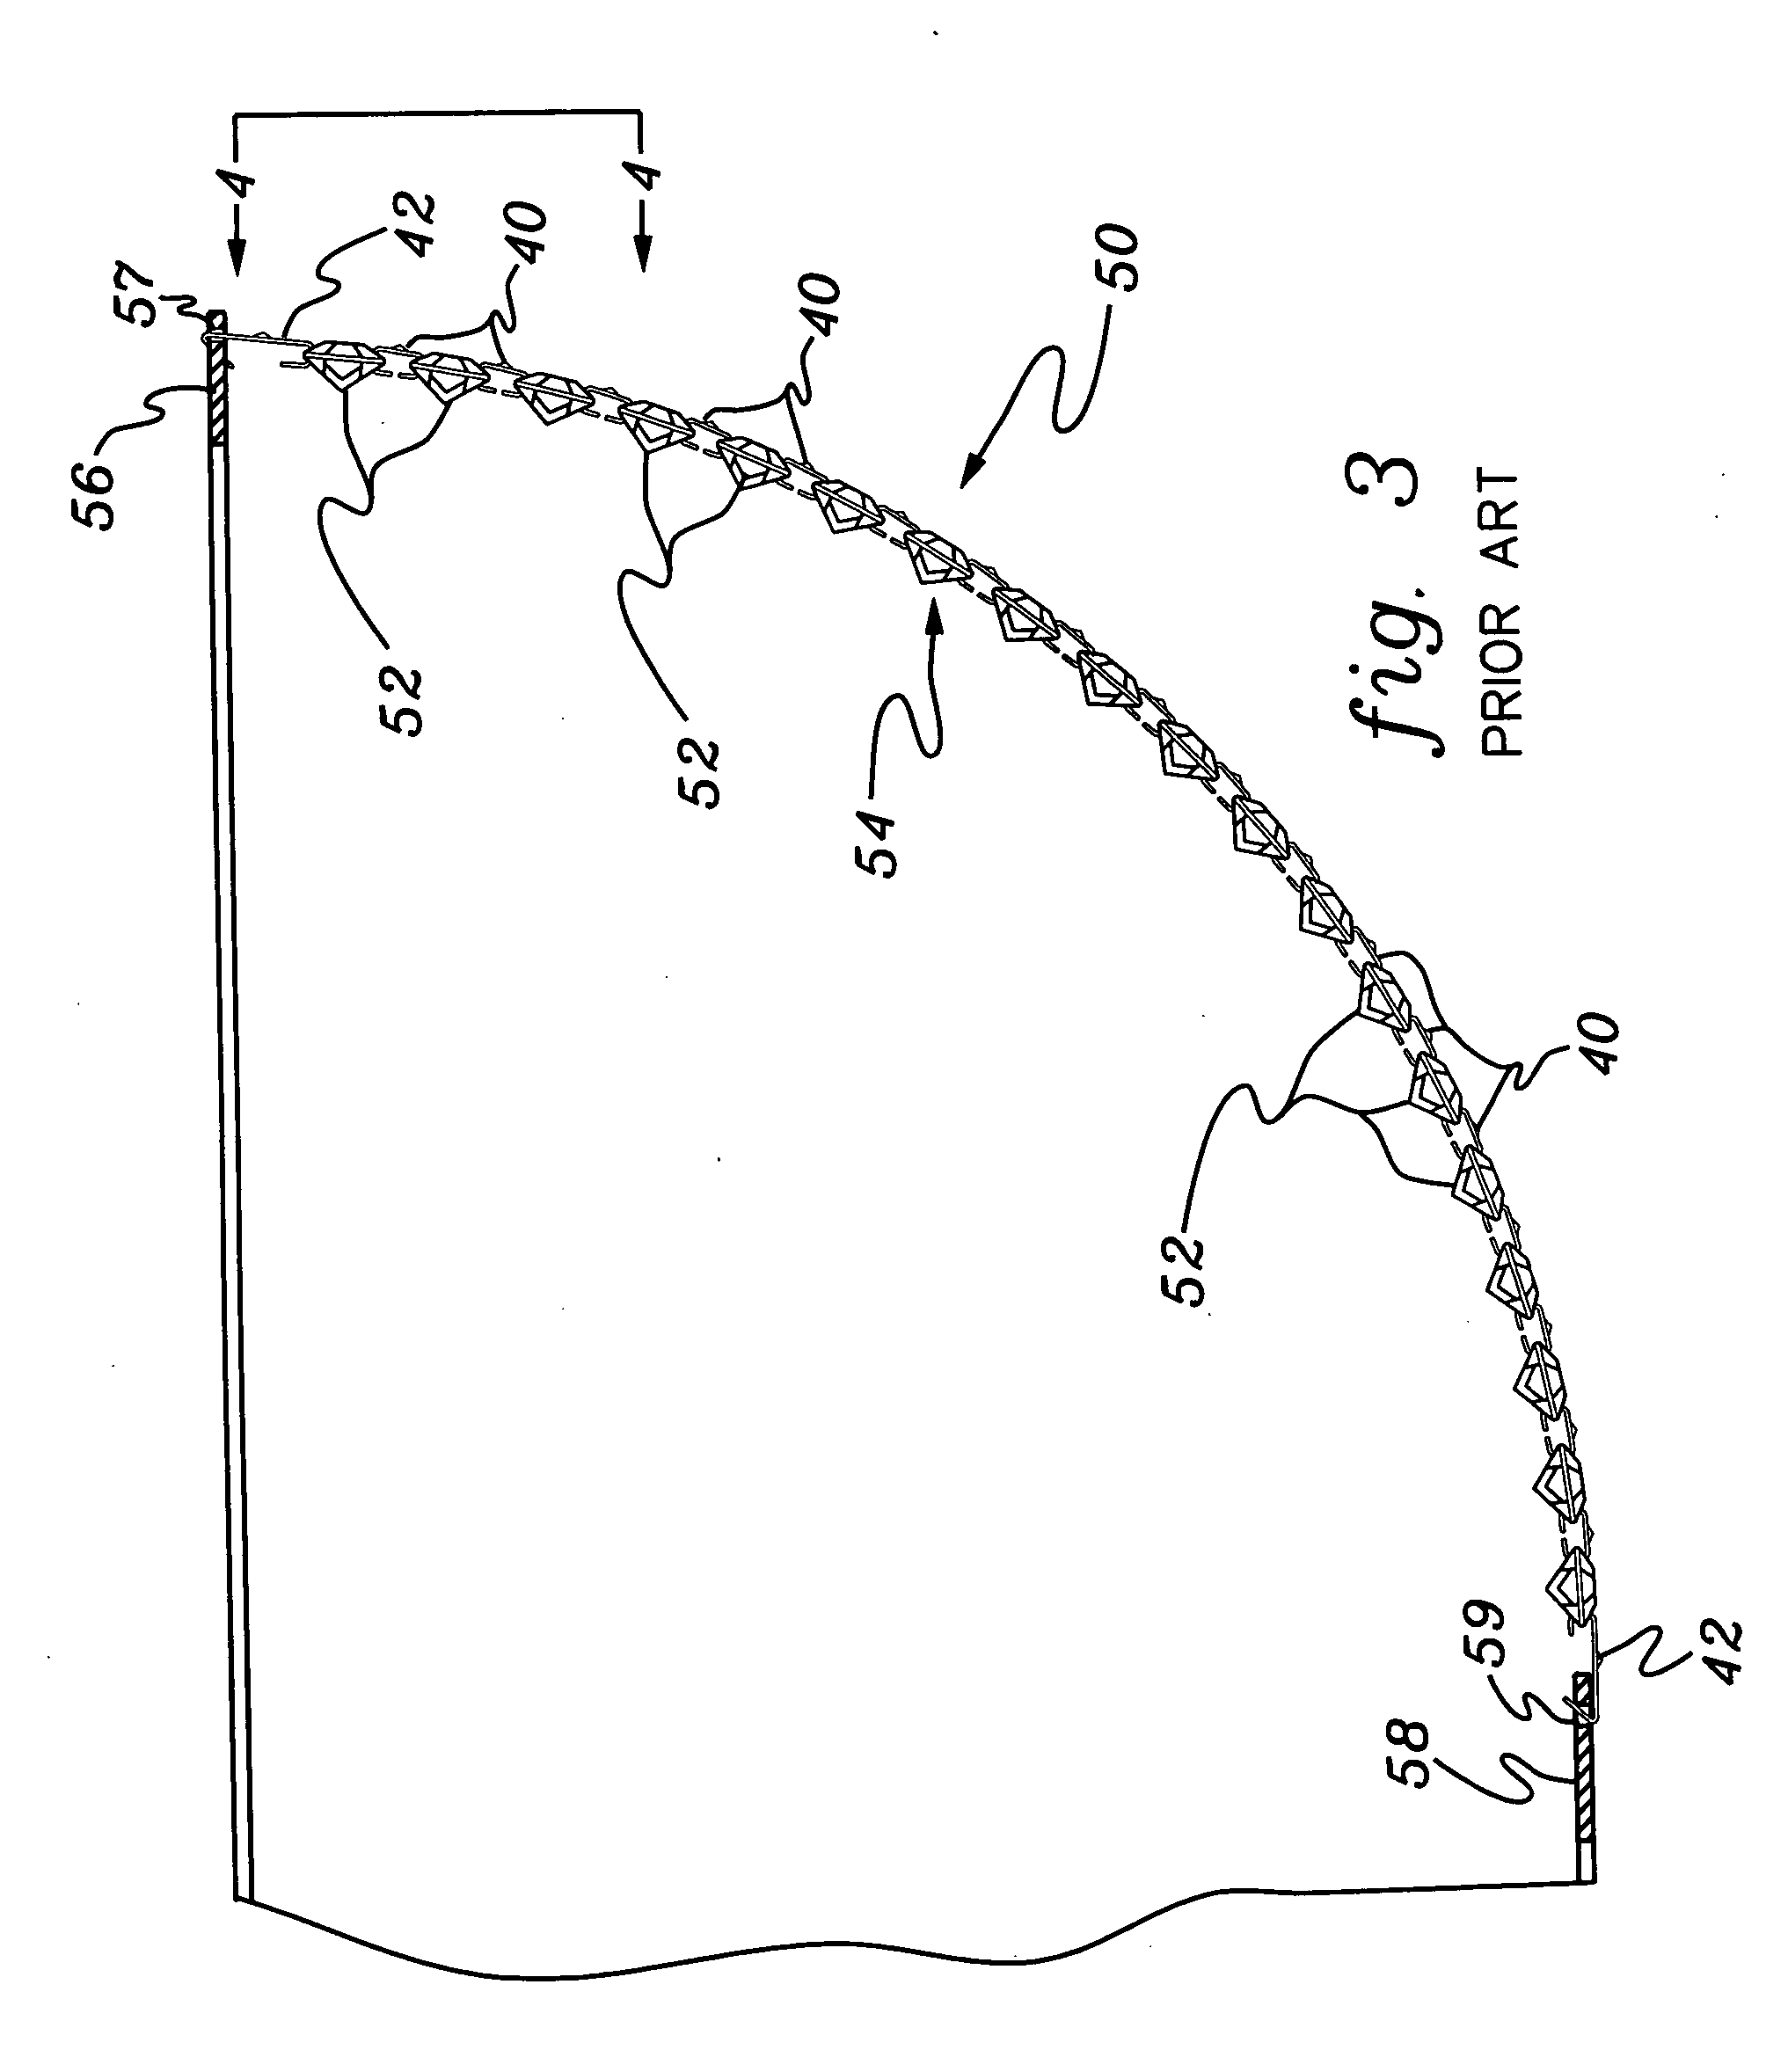 Arrangements and methods for connecting decorative ornaments